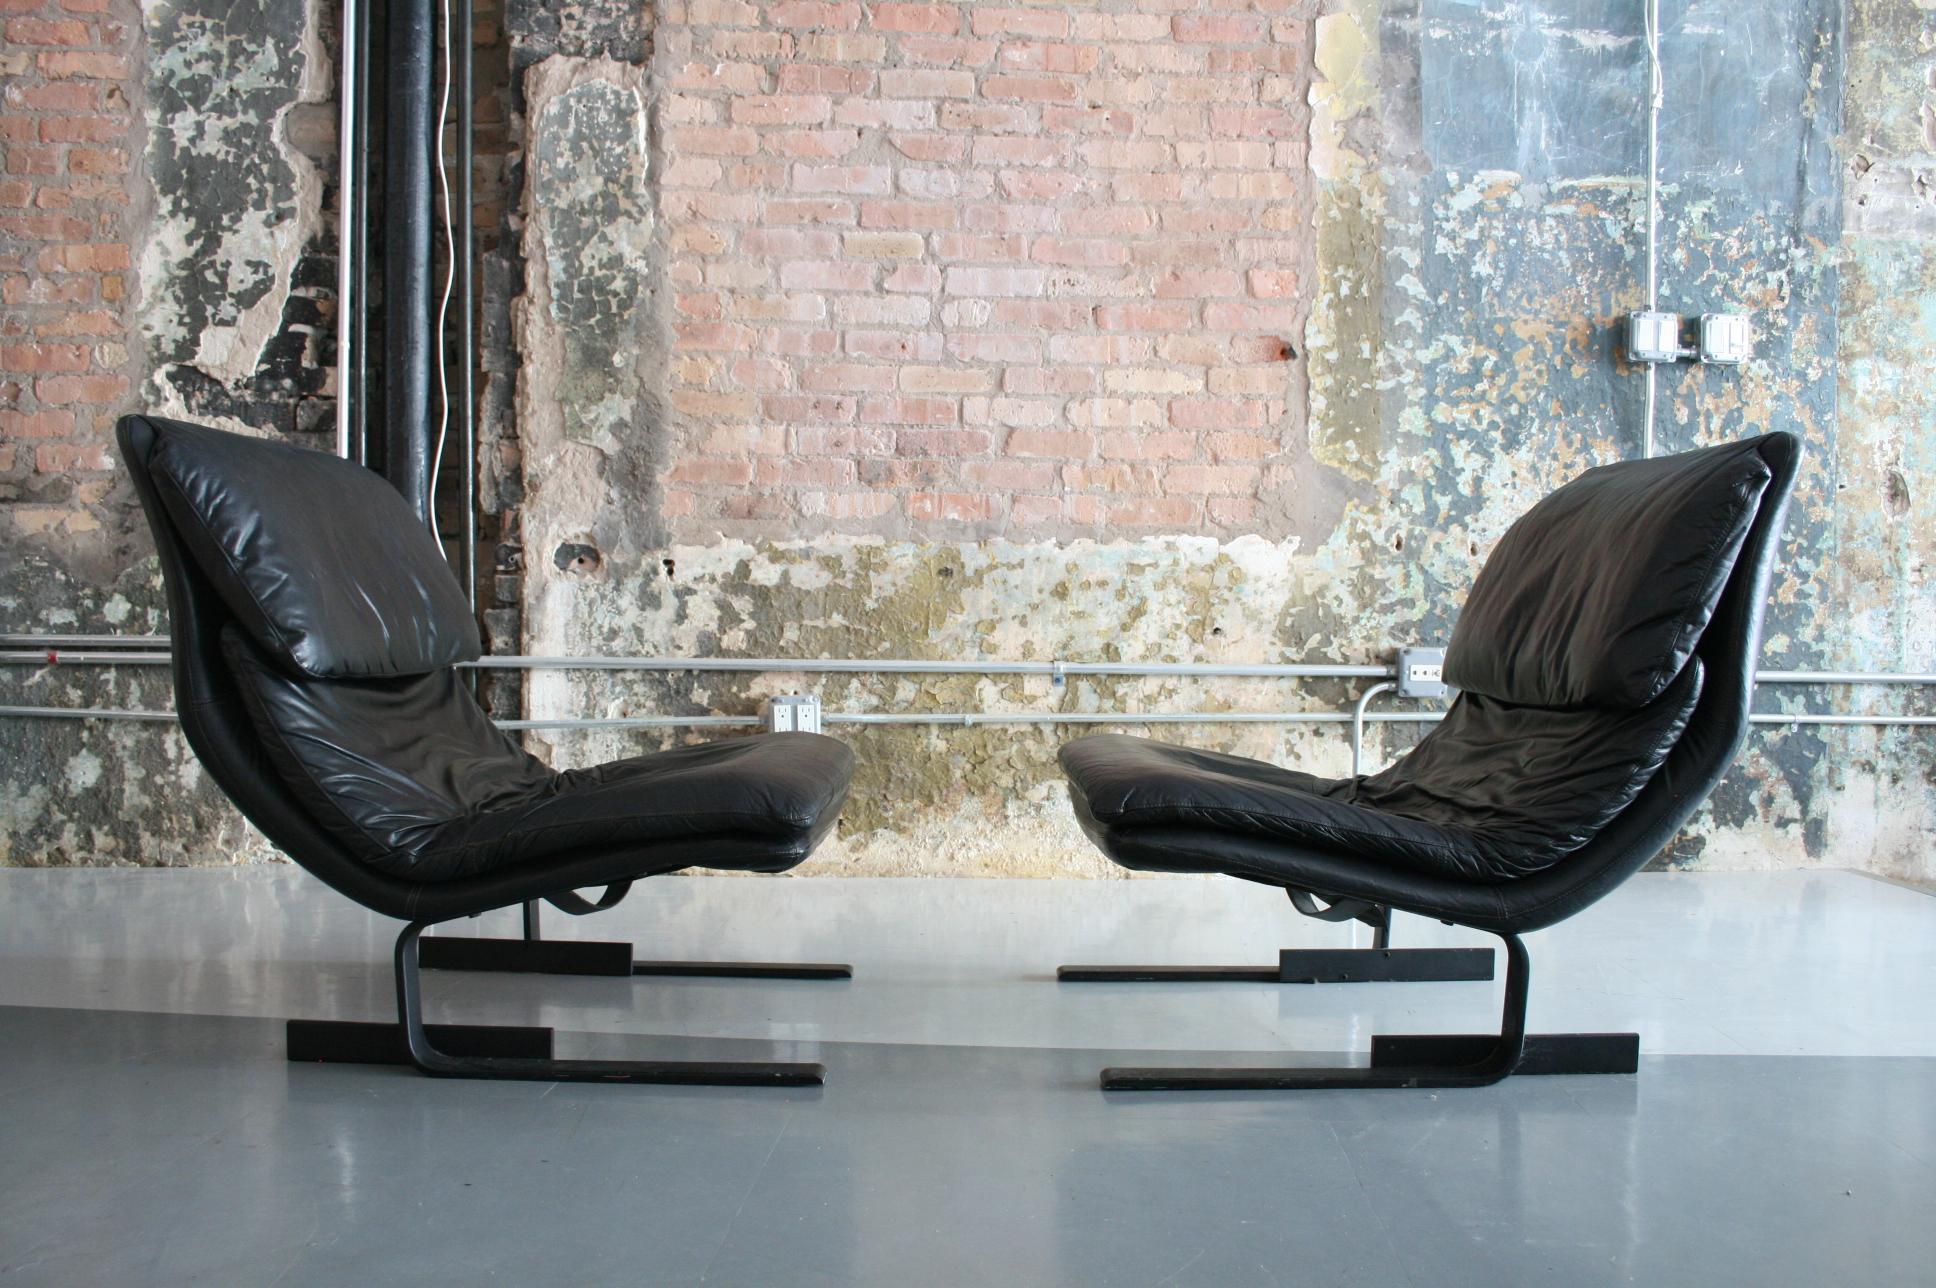 Pair of leather lounge chairs by Giovanni Offredi for Saporiti Italy. Black leather on black lacquered steel bases.